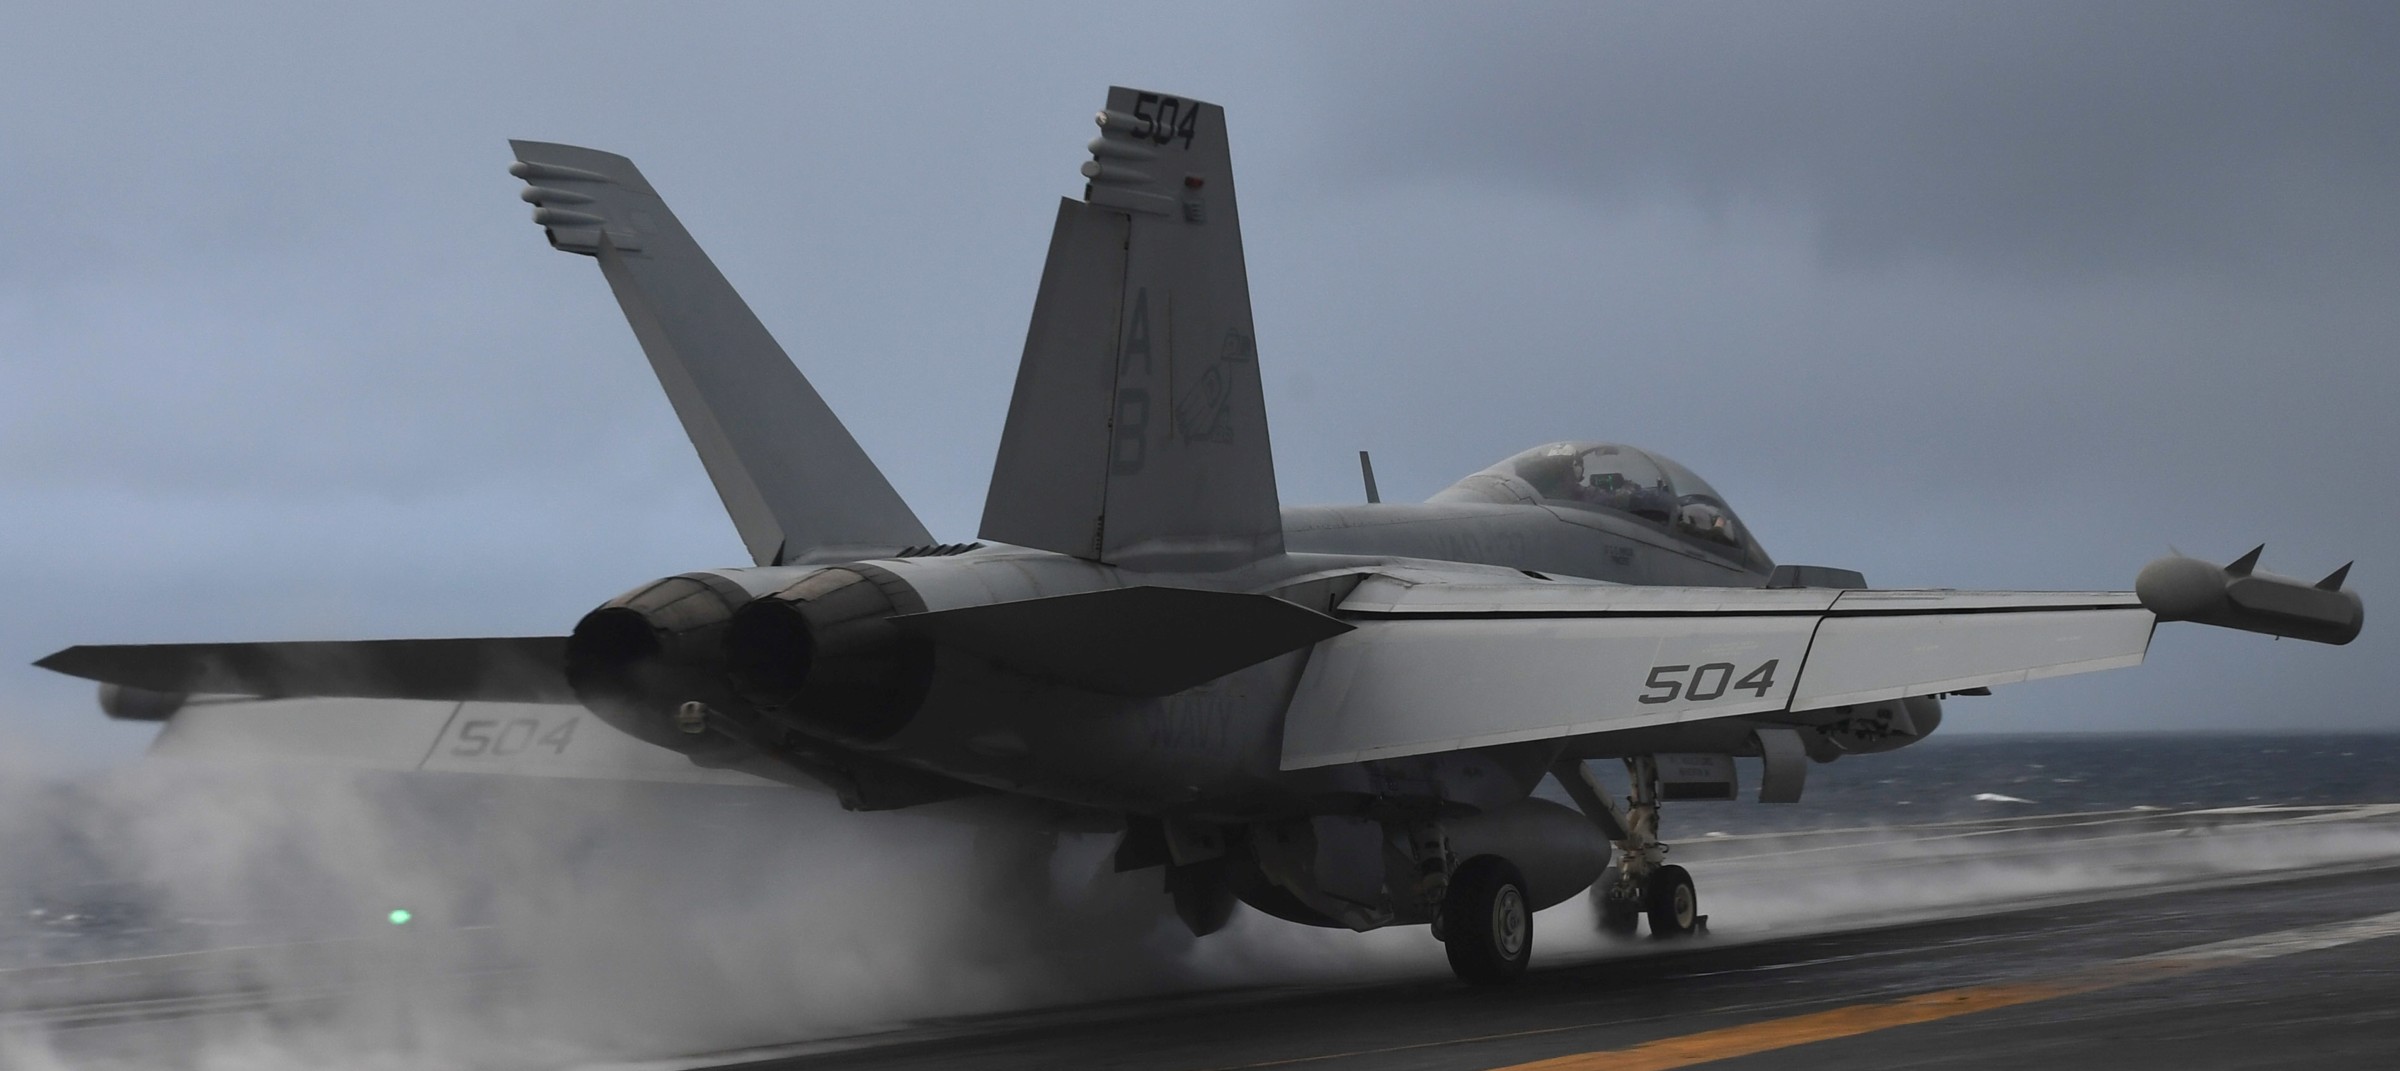 vaq-137 rooks electronic attack squadron us navy ea-18g growler carrier air wing cvw-1 uss harry s. truman cvn-75 75